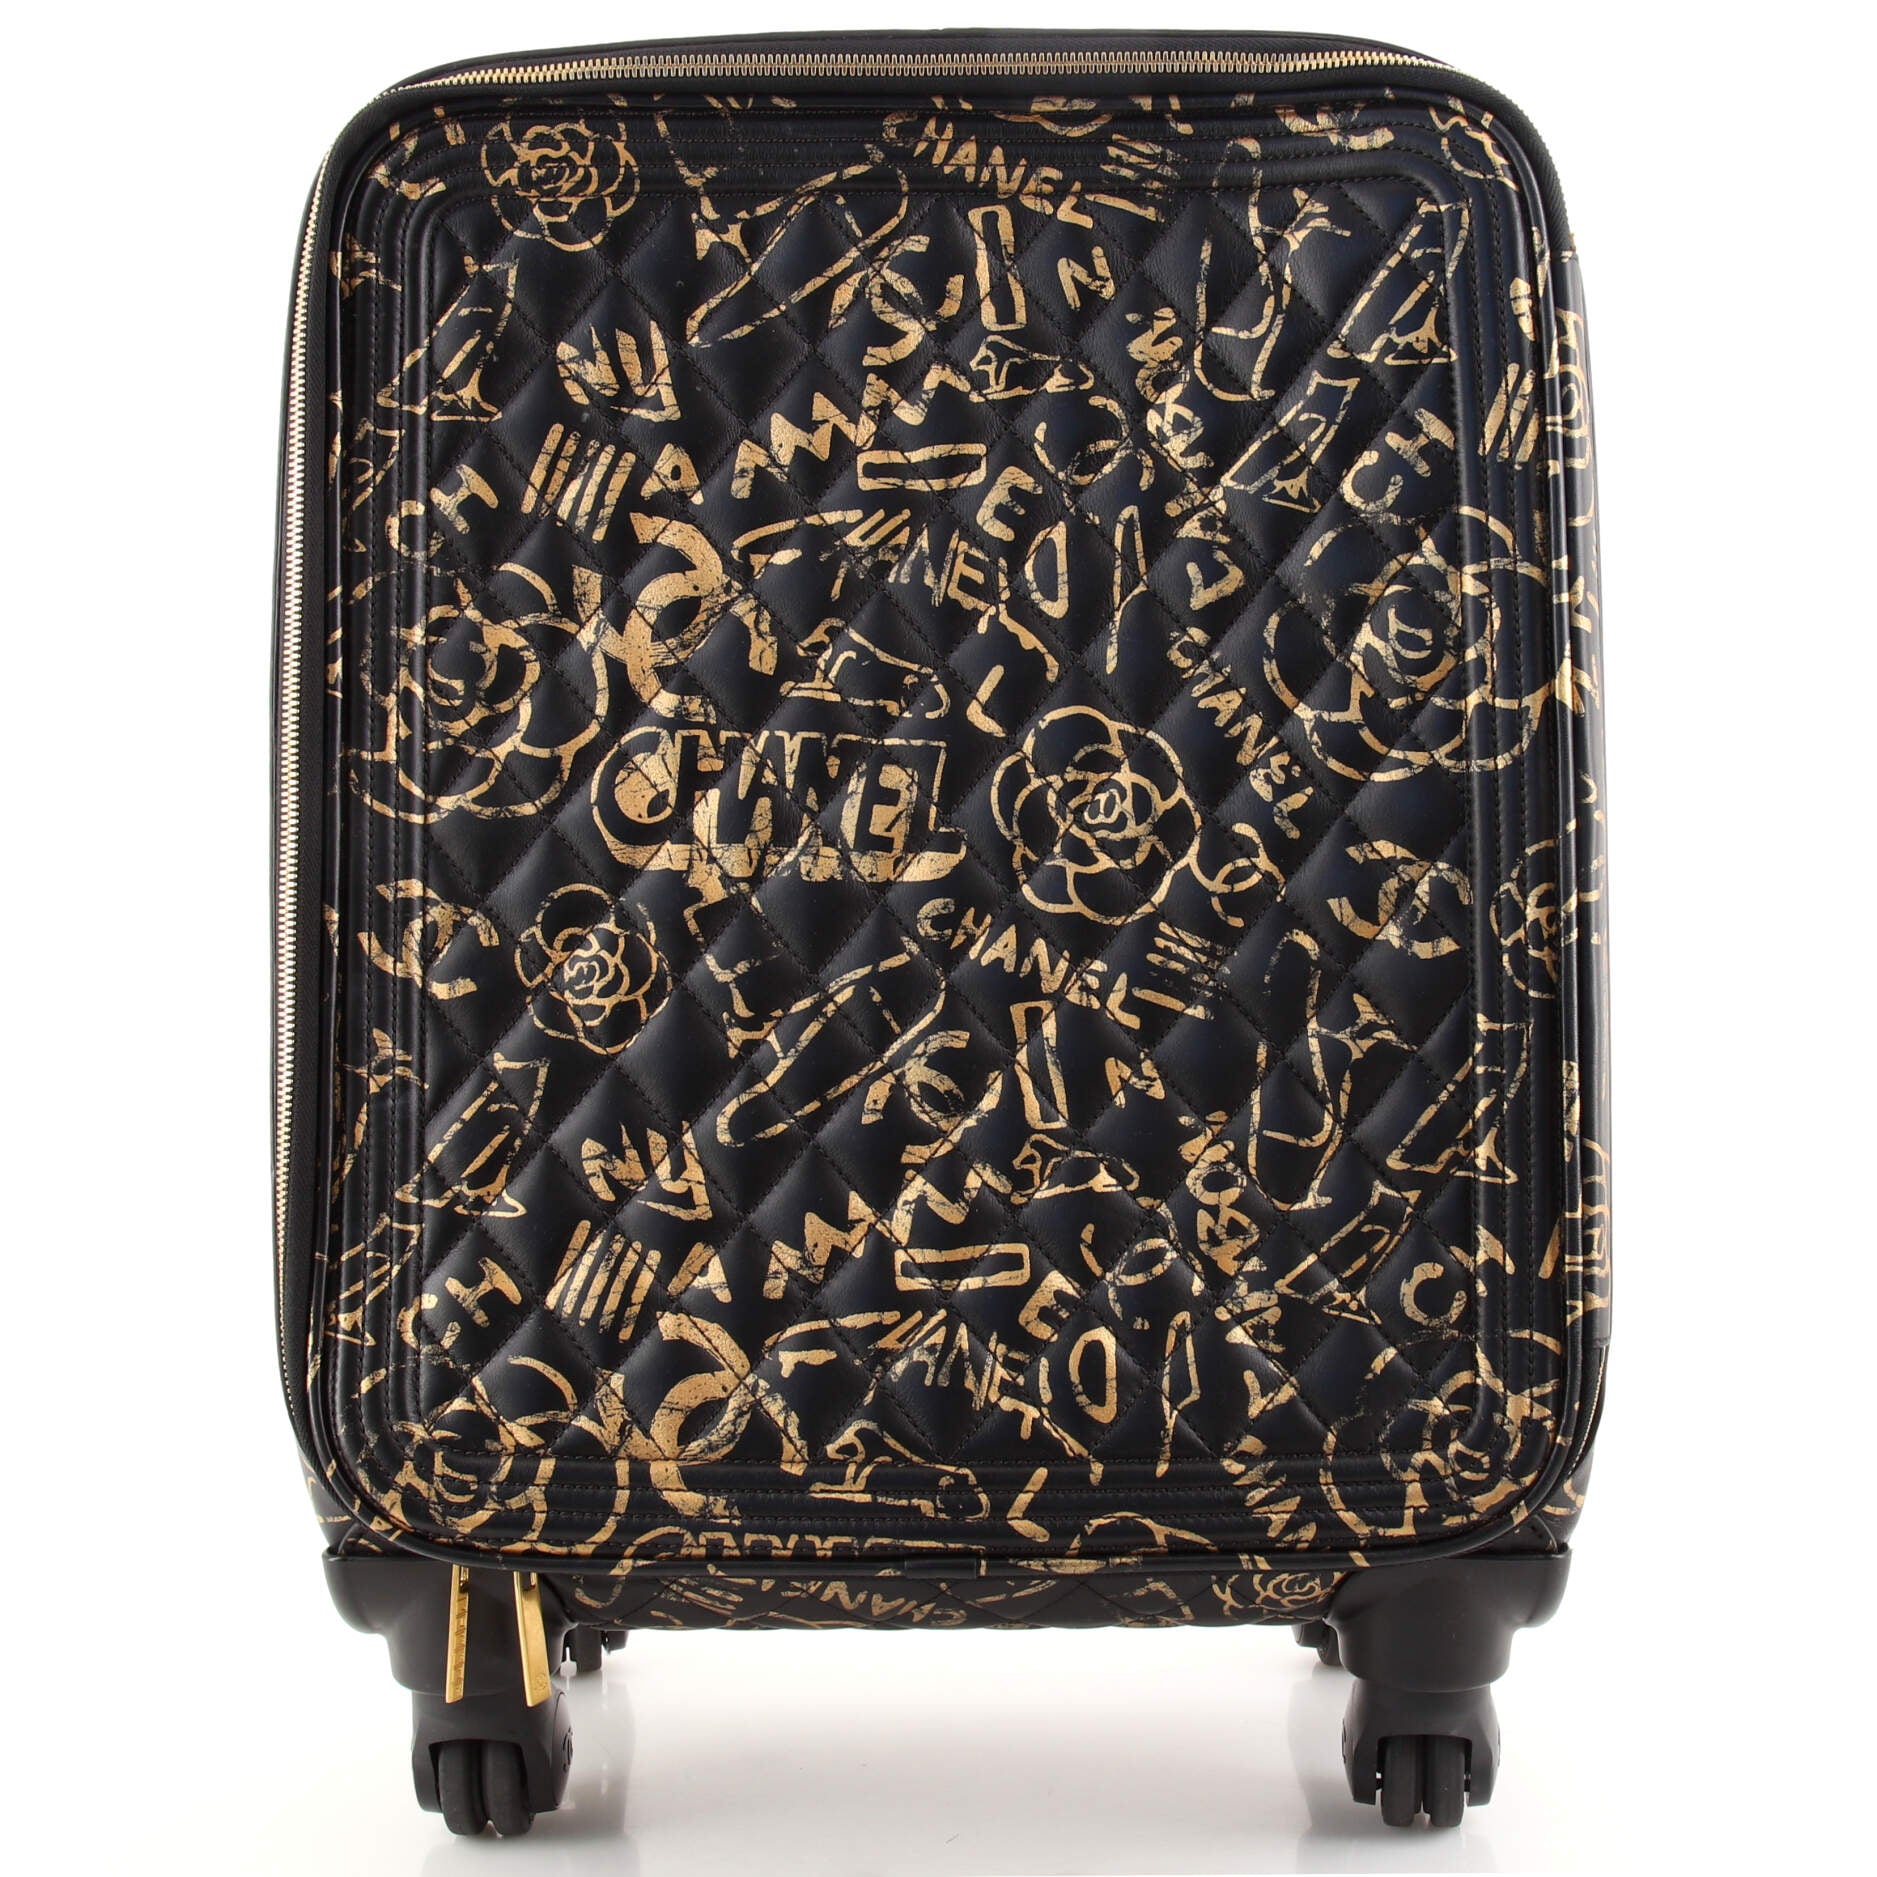 Chanel Coco Cocoon Trolley Rolling Case - Luggage and Travel